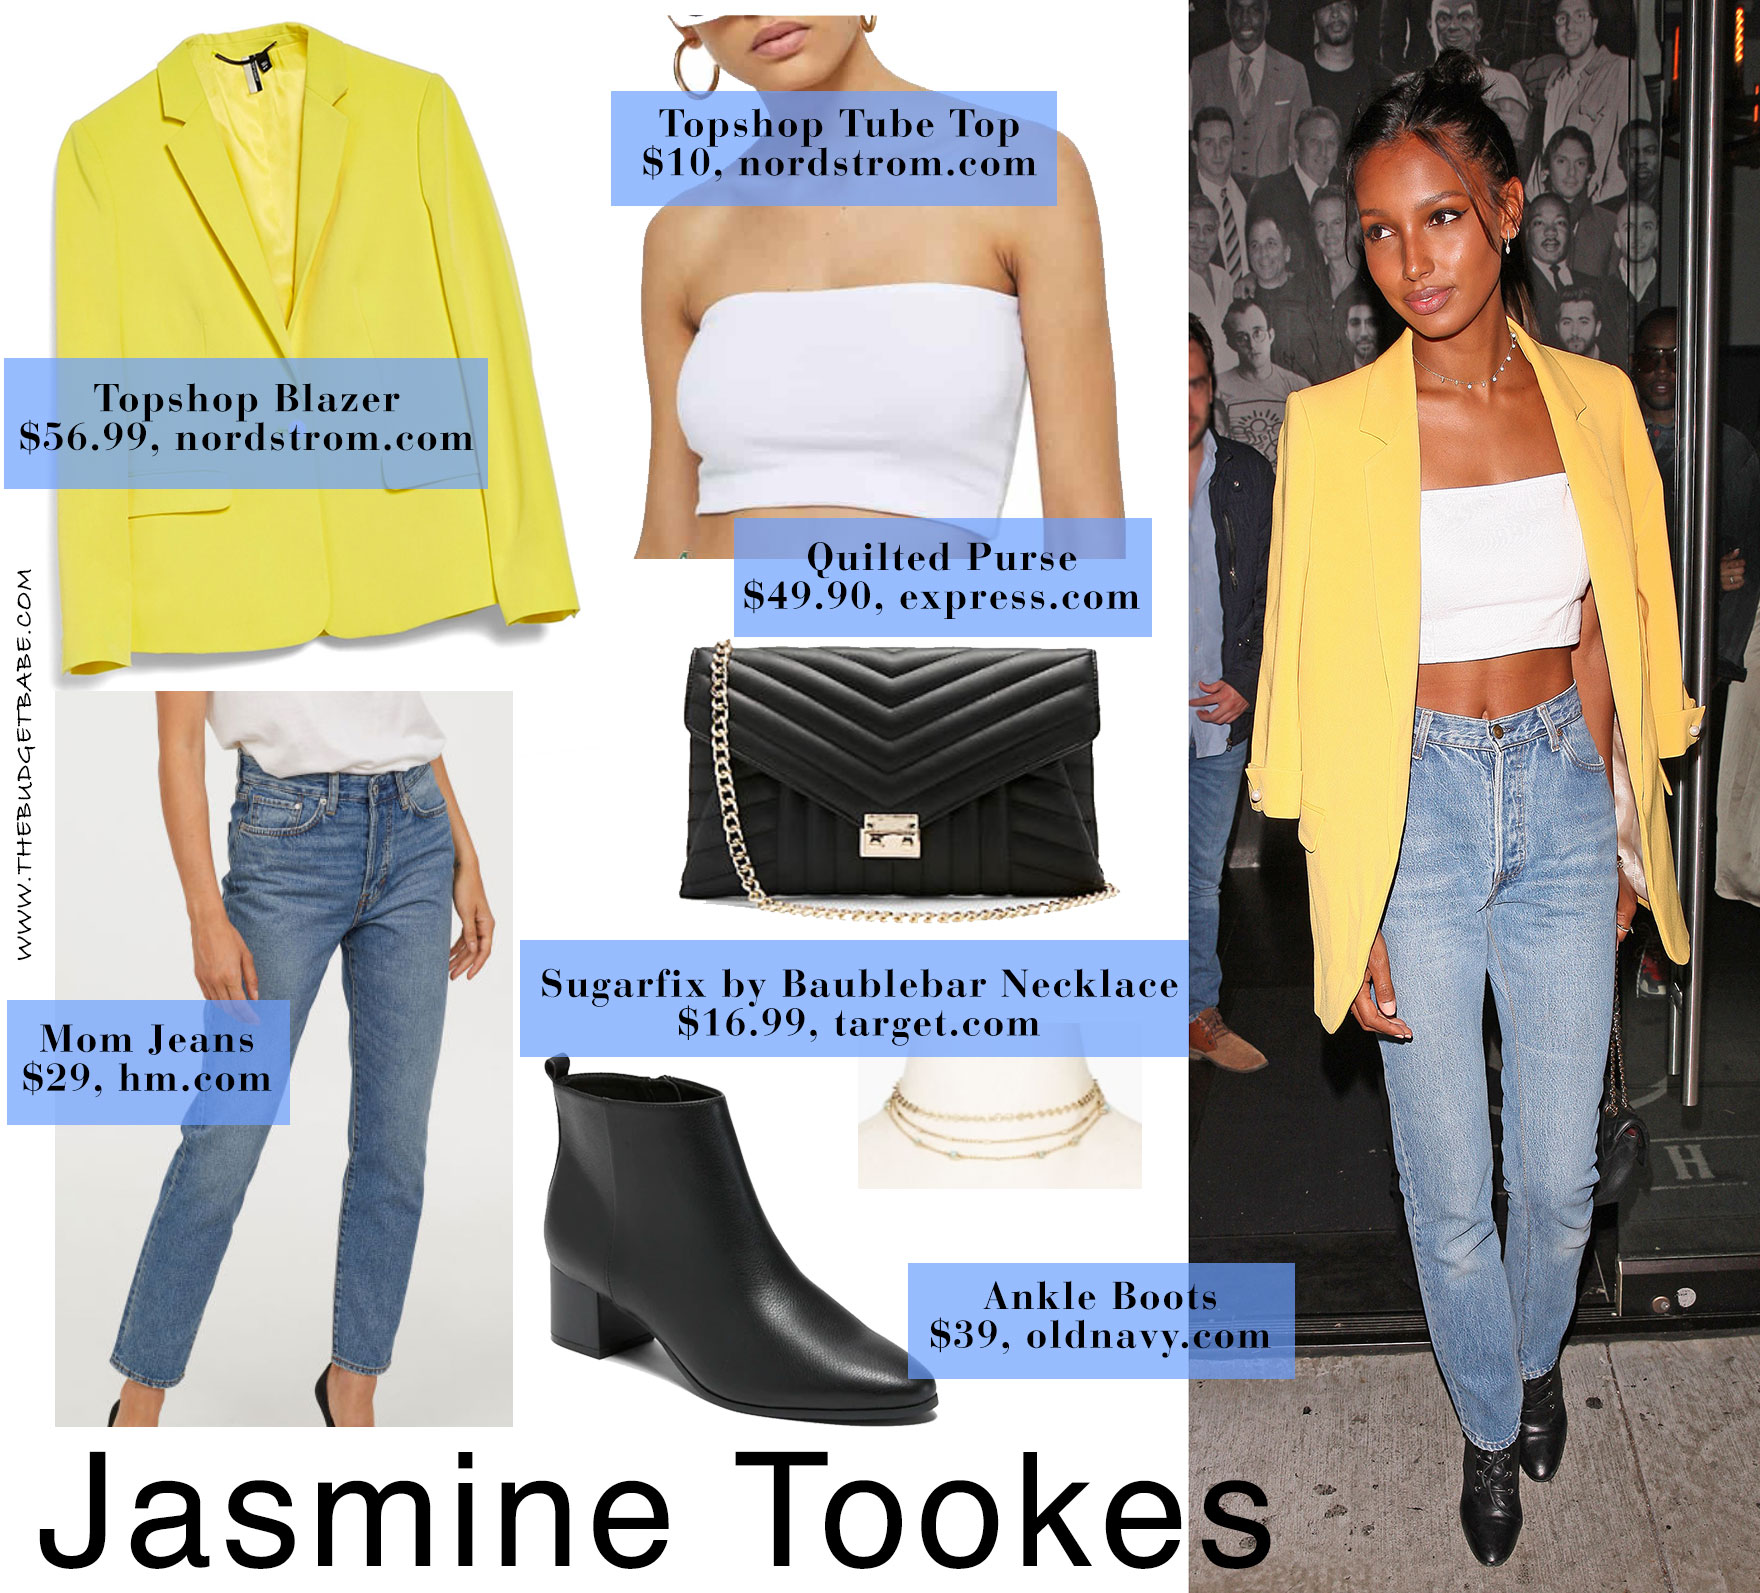 Jasmine Tookes wears a yellow blazer, white crop top and mom jeans